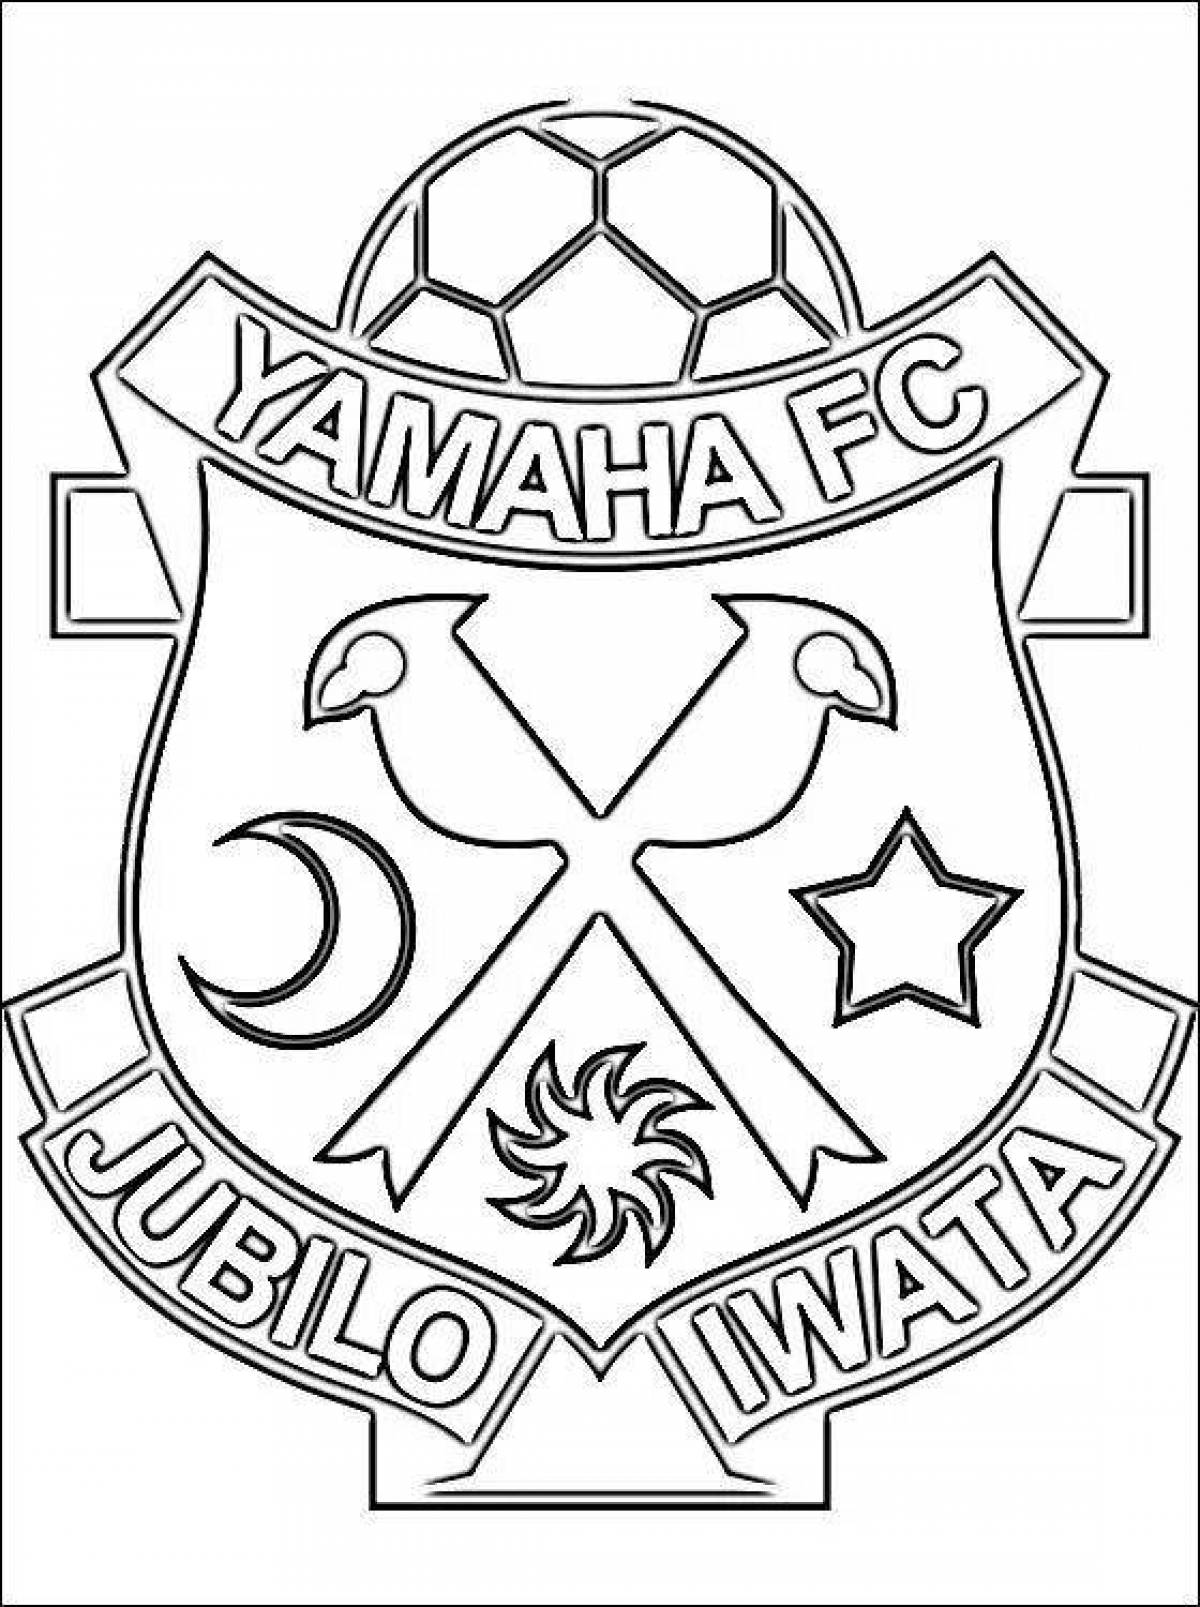 Sparkly coloring pages of emblems of football clubs